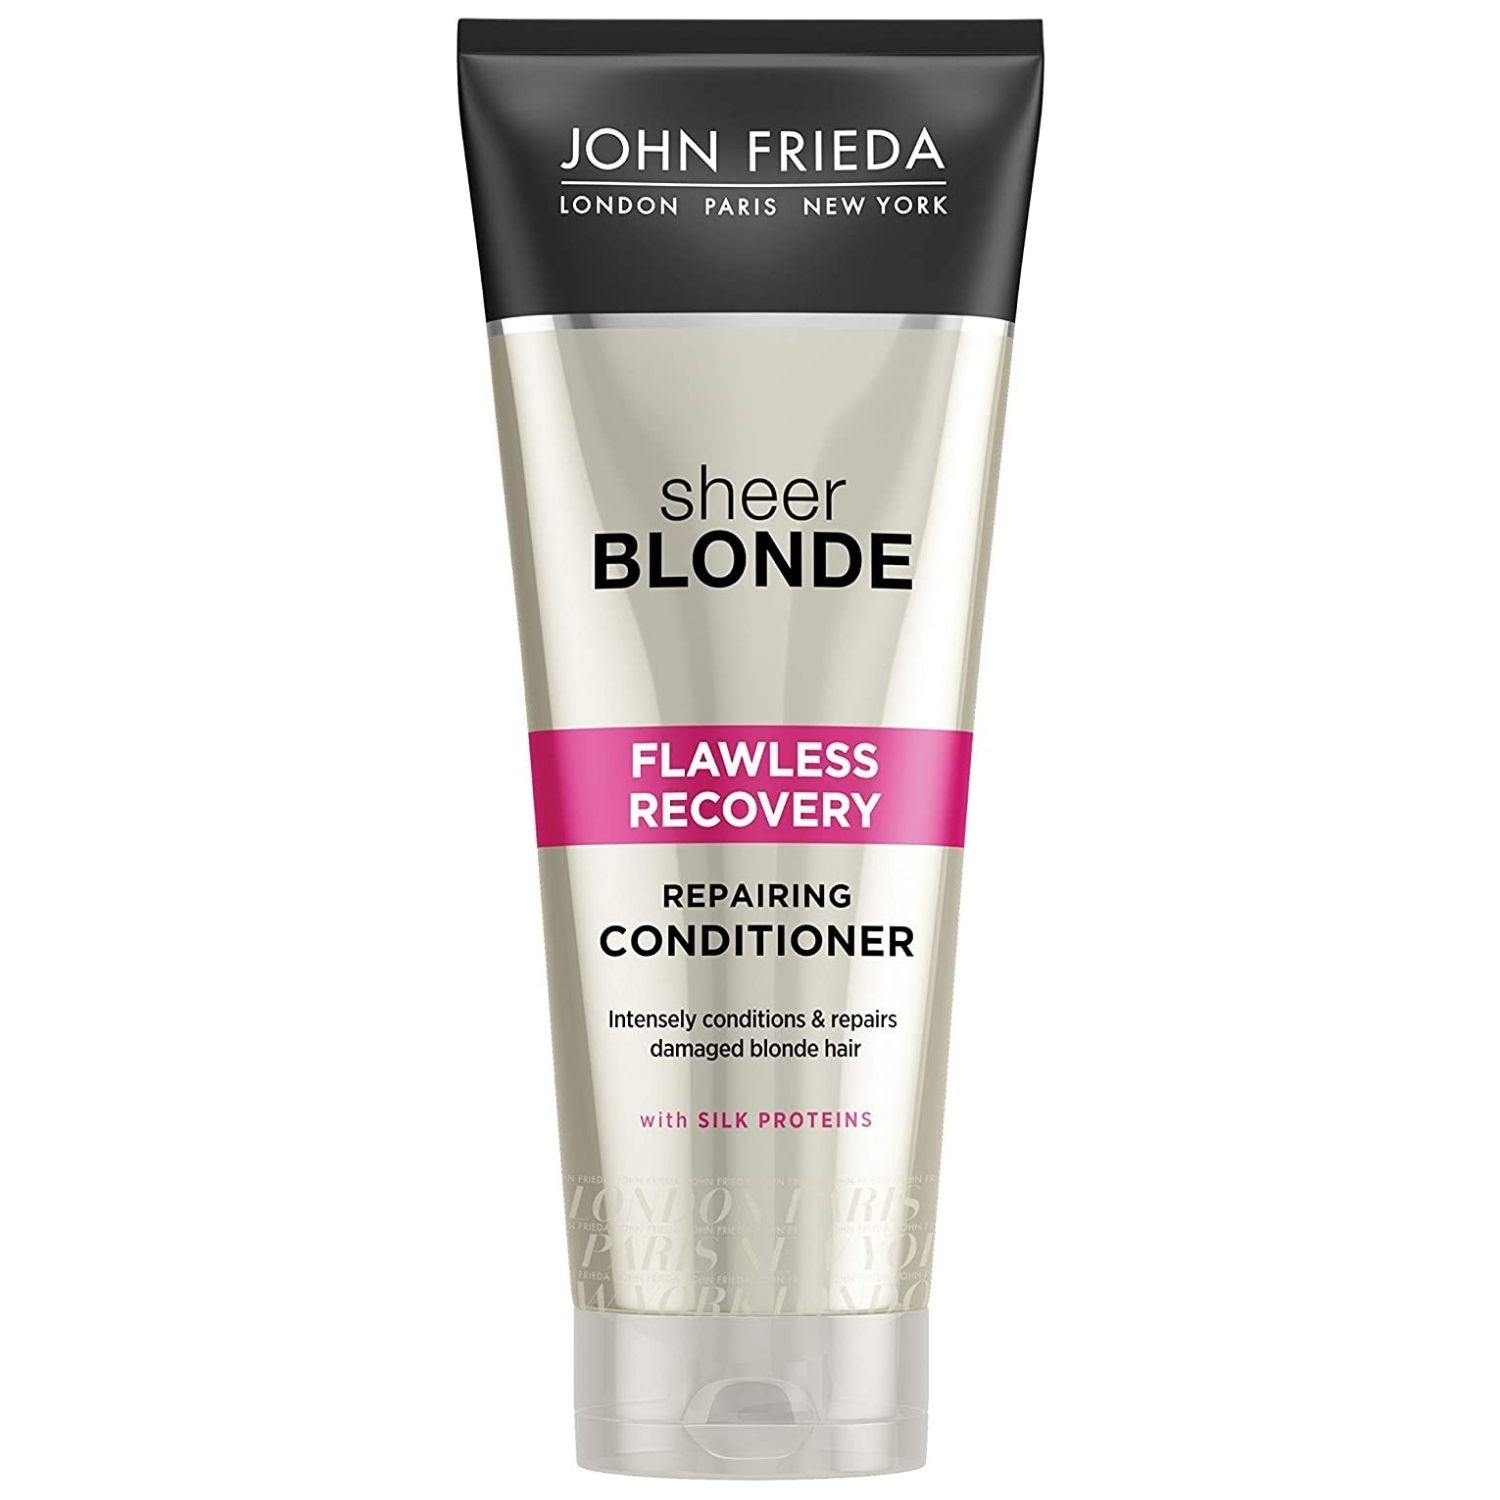 John Frieda Sheer Blonde Flawless Recovery Conditioner 1 Shaws Department Stores